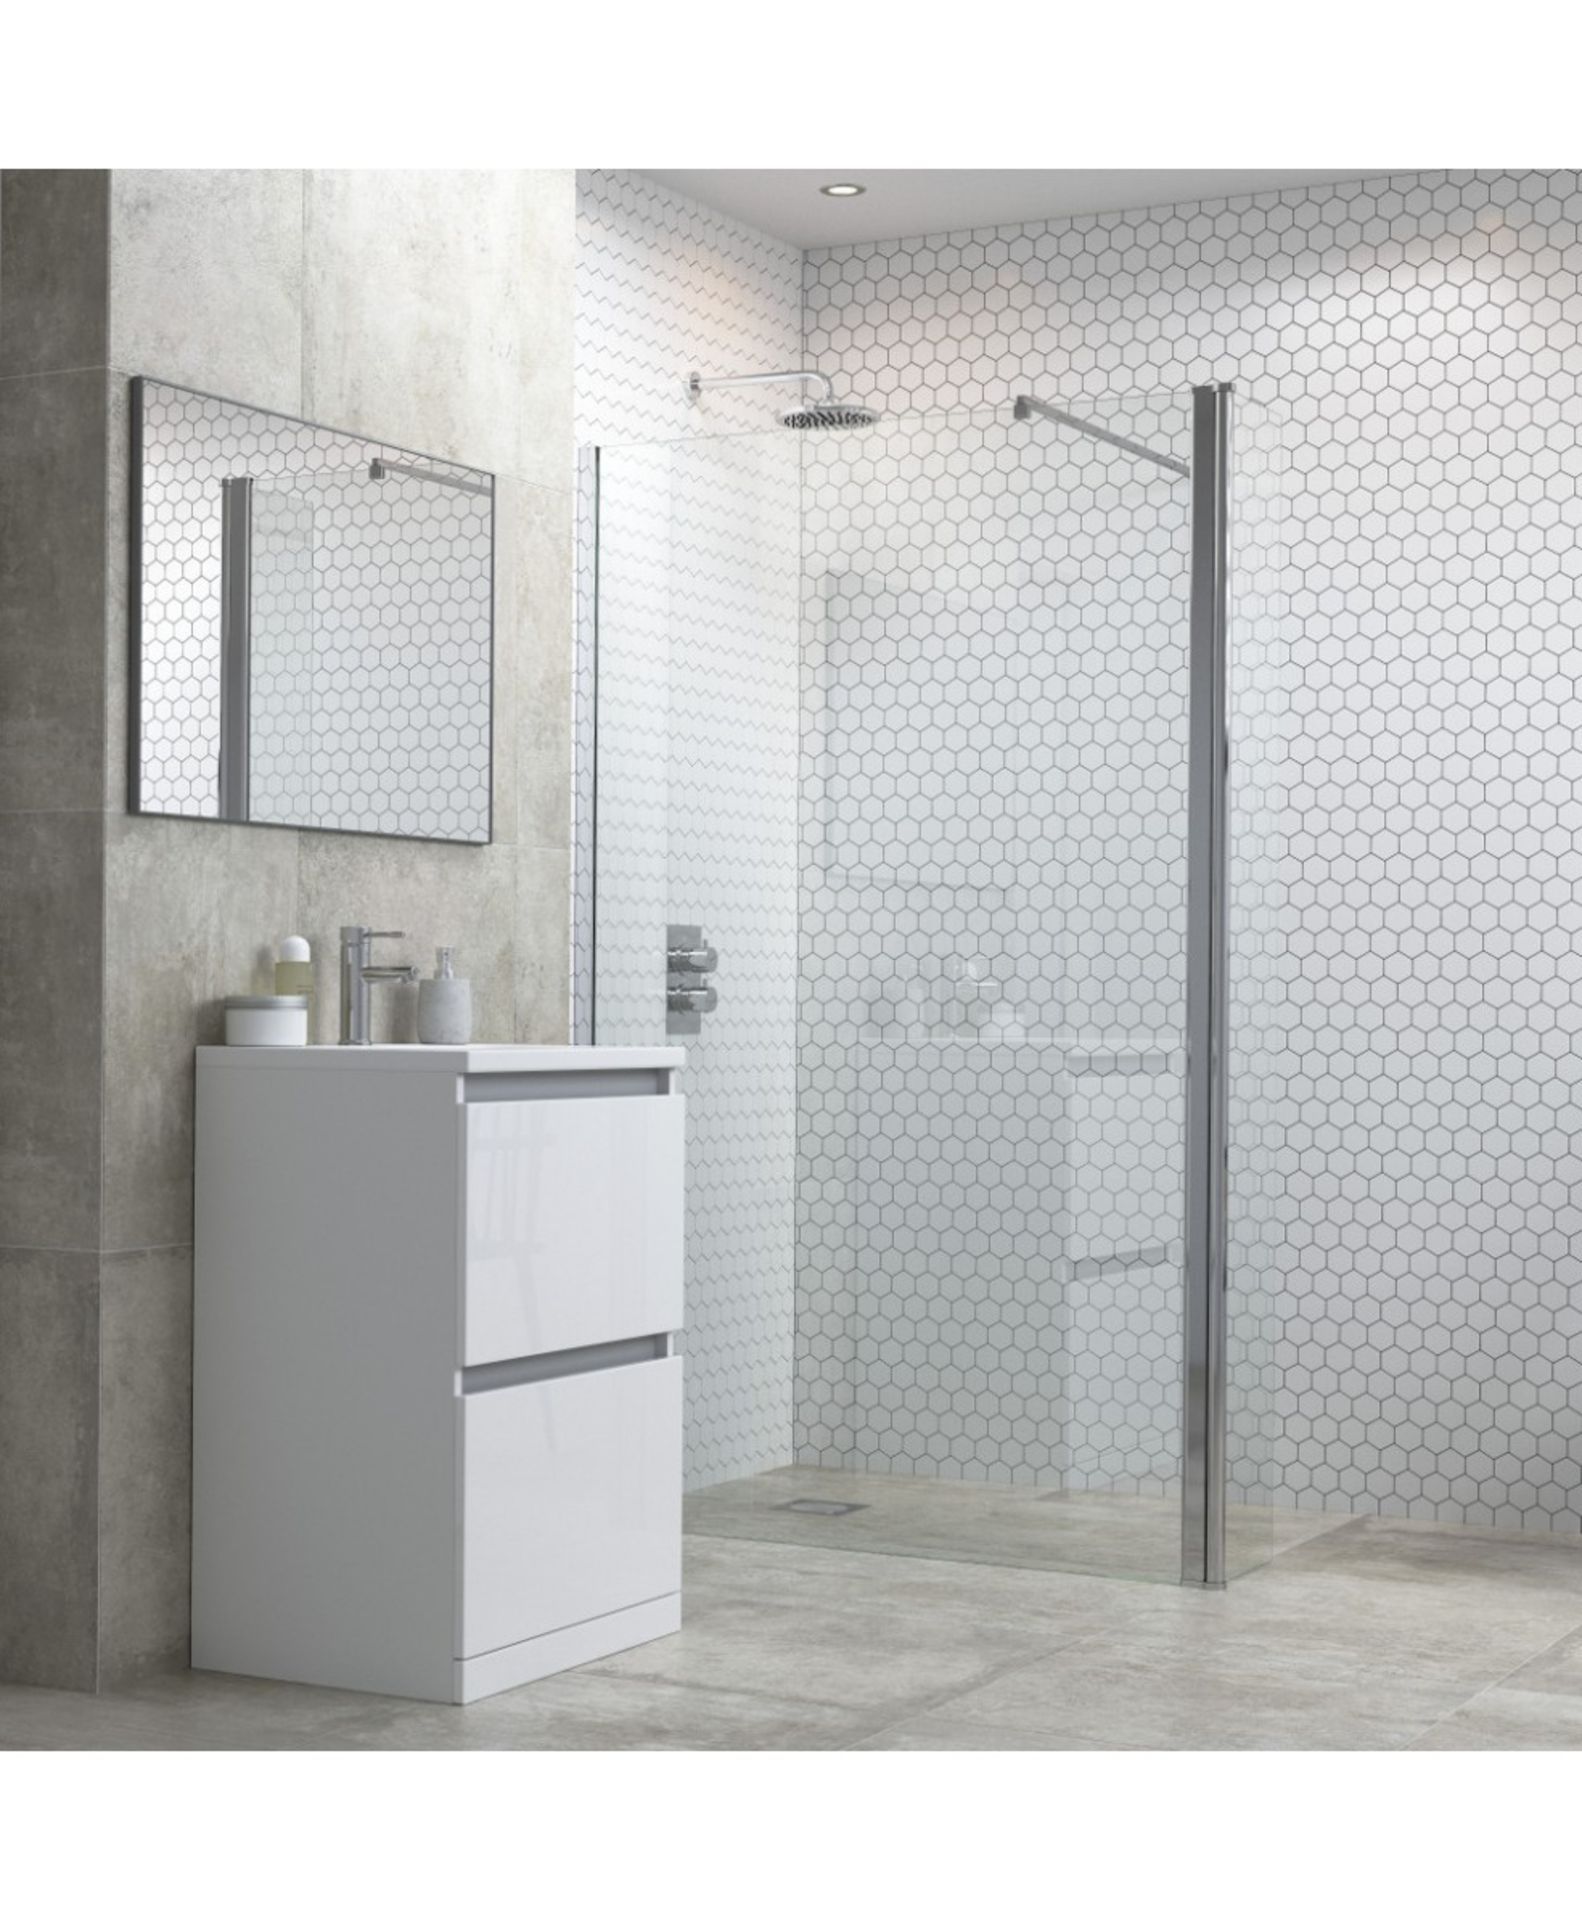 (SP197) New 800x300mm - 8mm - Premium EasyClean Wetroom and rotatable panel.Rrp £399.99.8mm